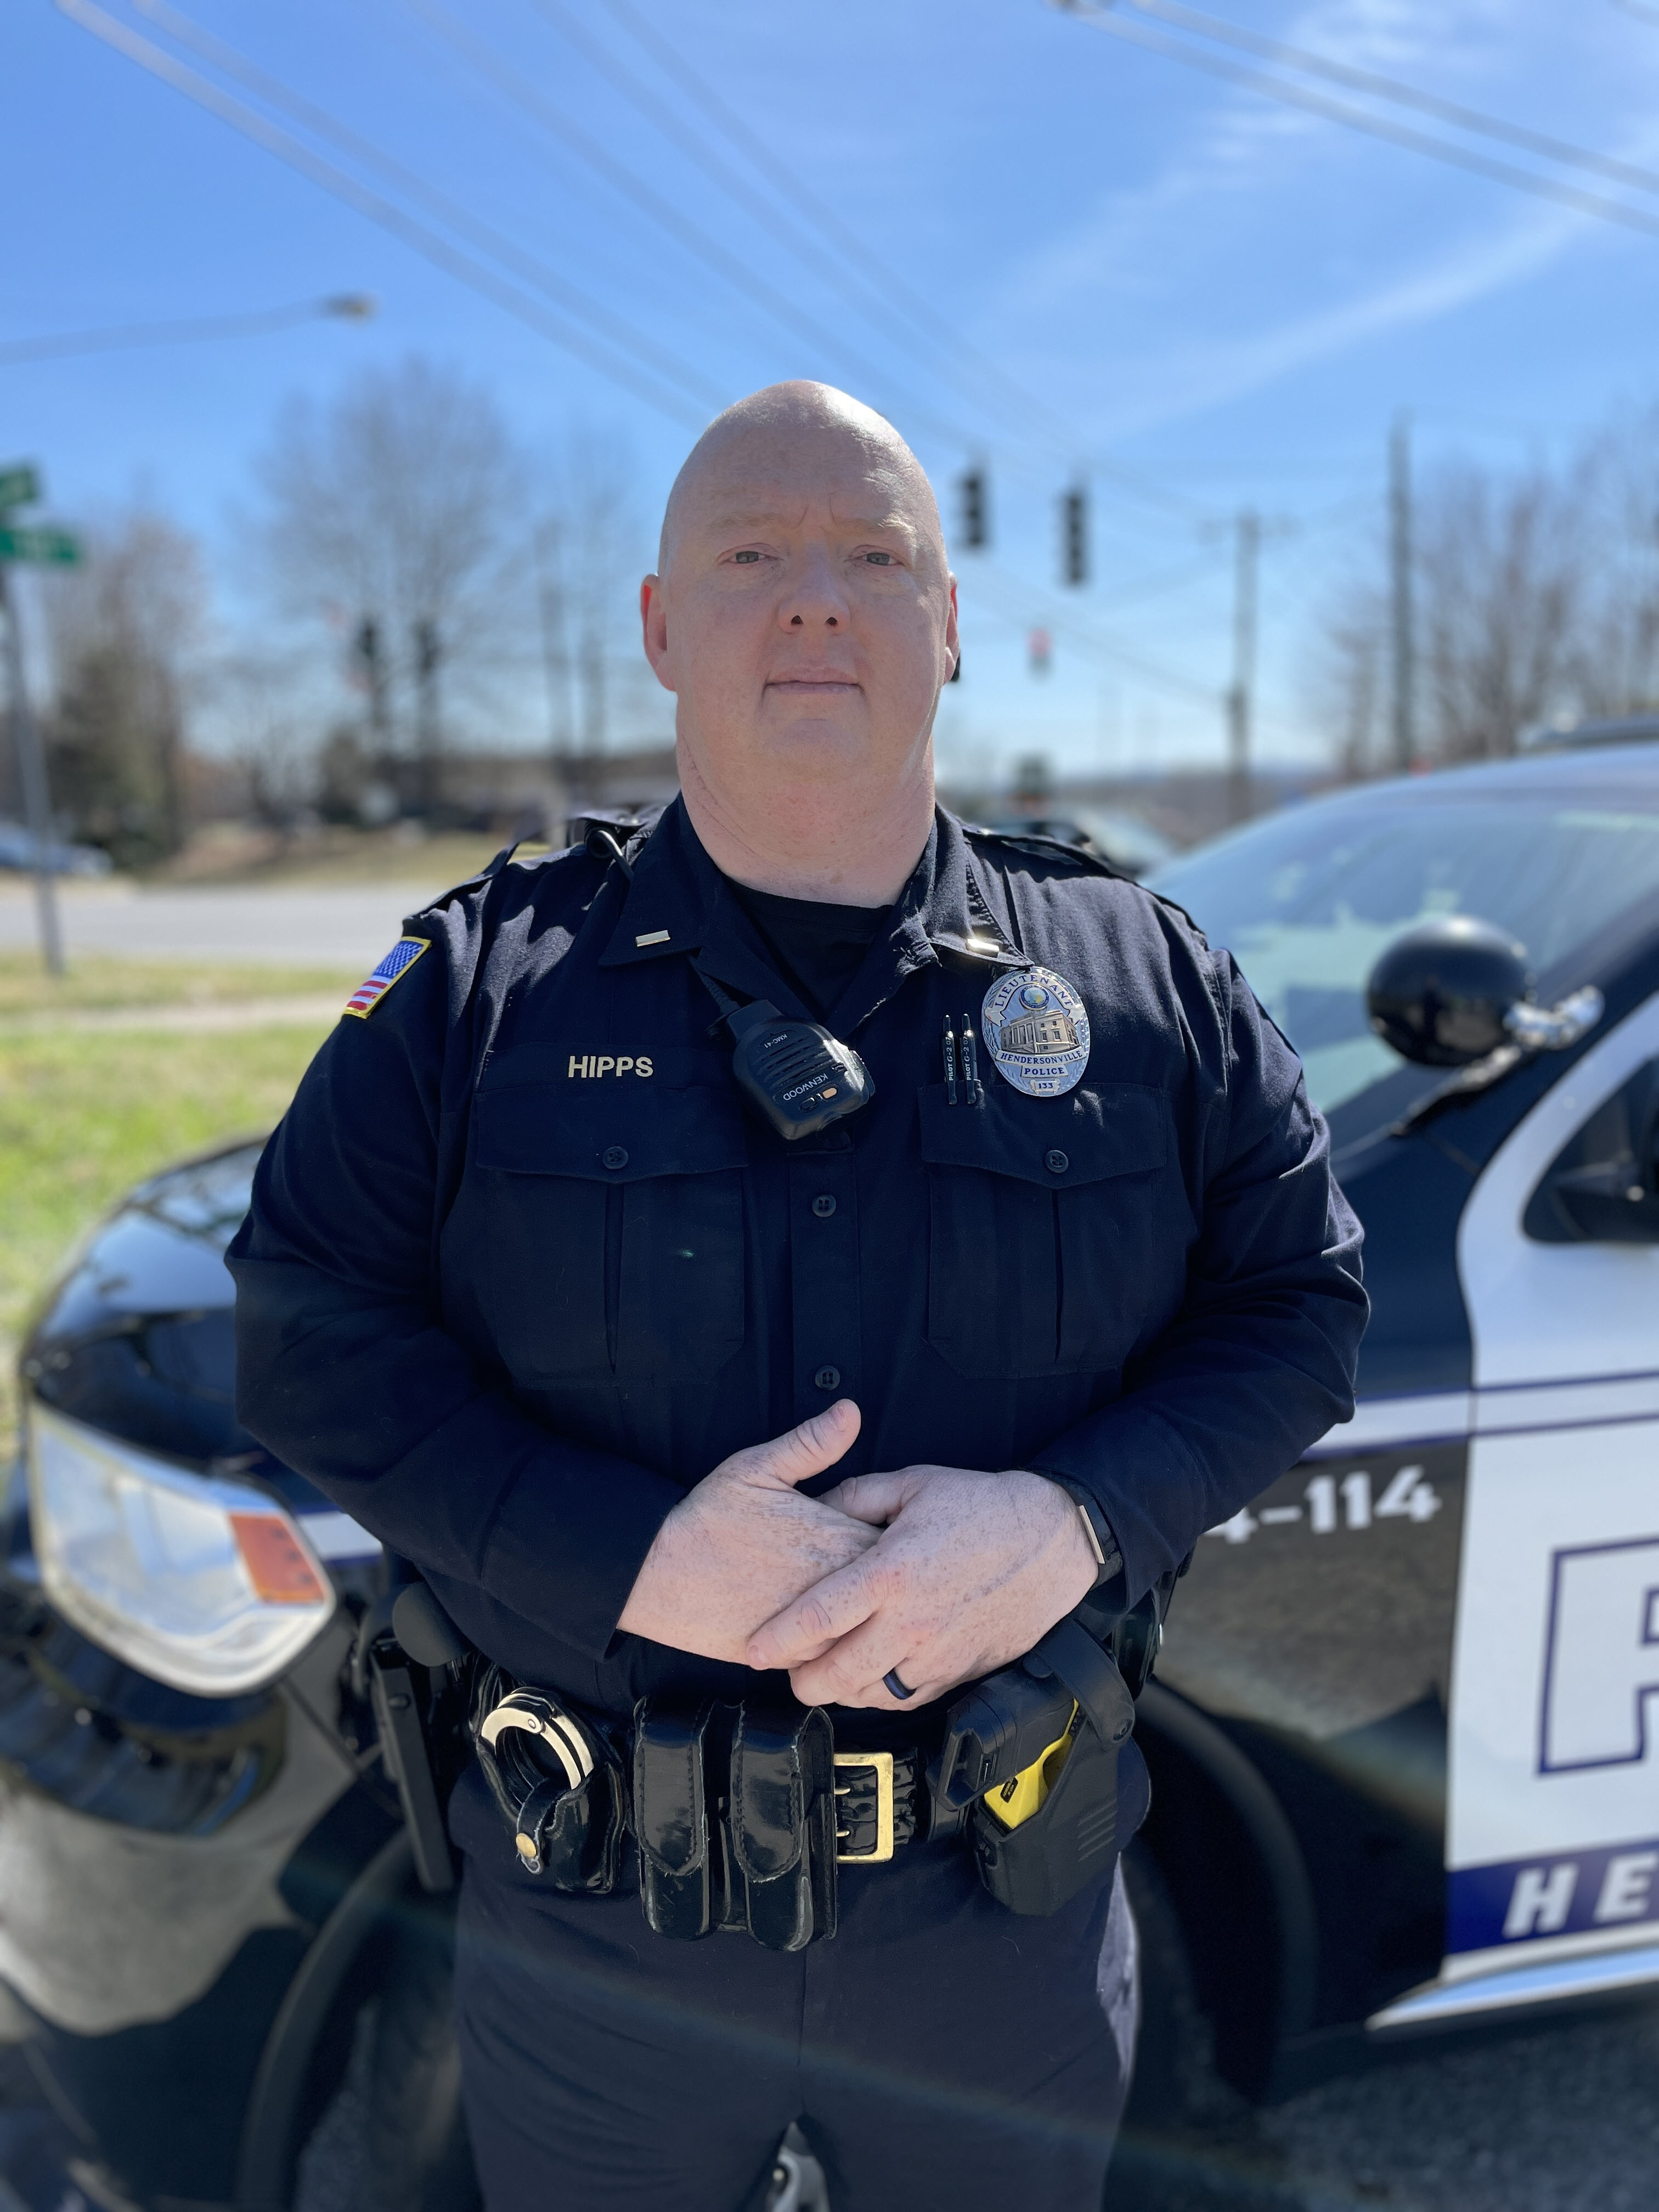 Sgt. Kenneth Hipps of the Hendersonville Police Department